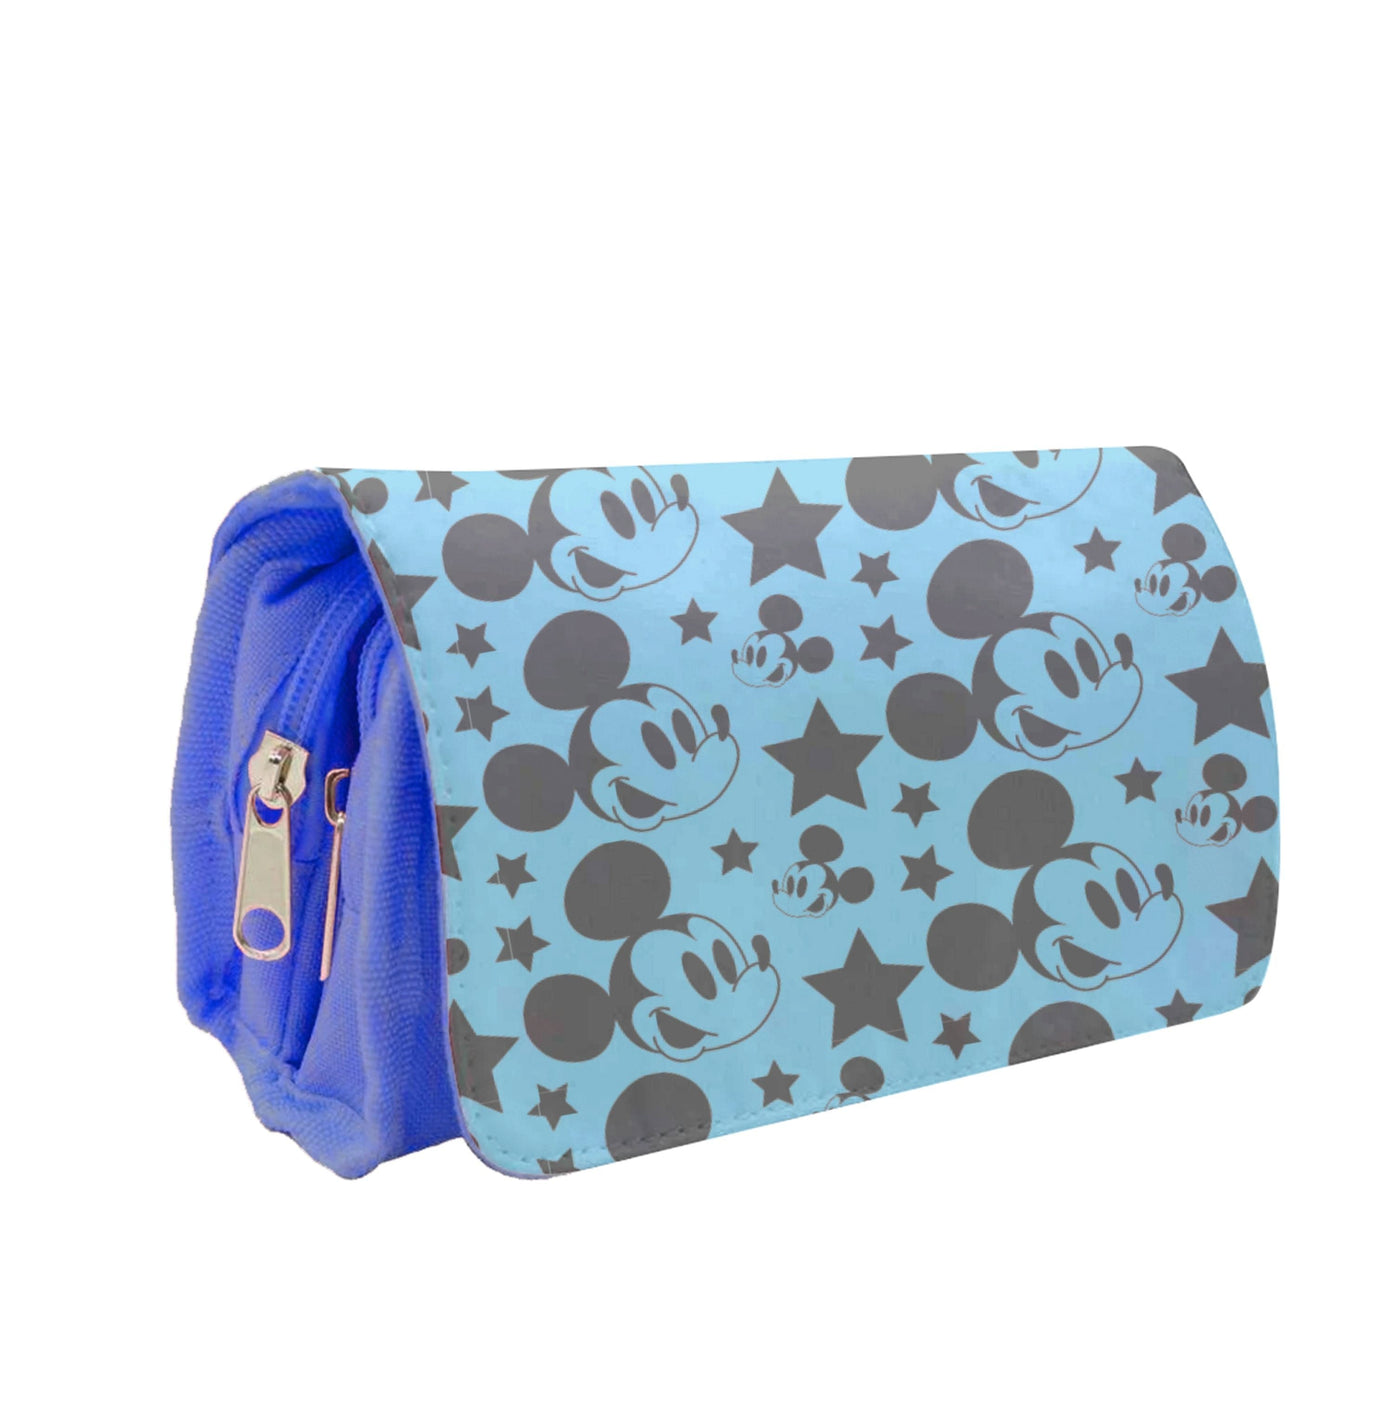 Mickey Mouse Pattern Pencil Case